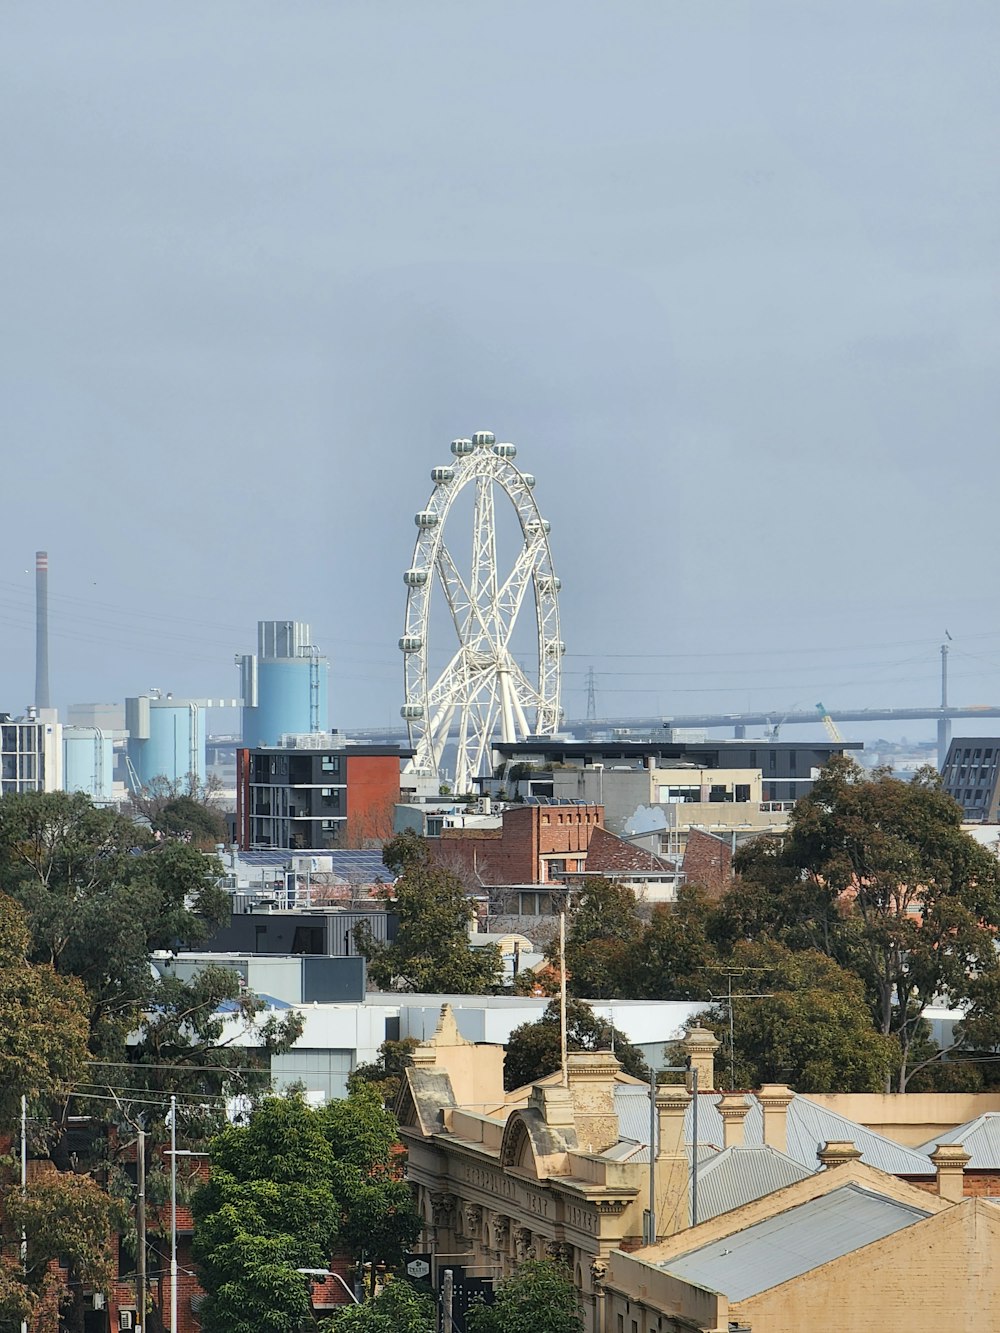 a ferris wheel in the distance with buildings in the foreground